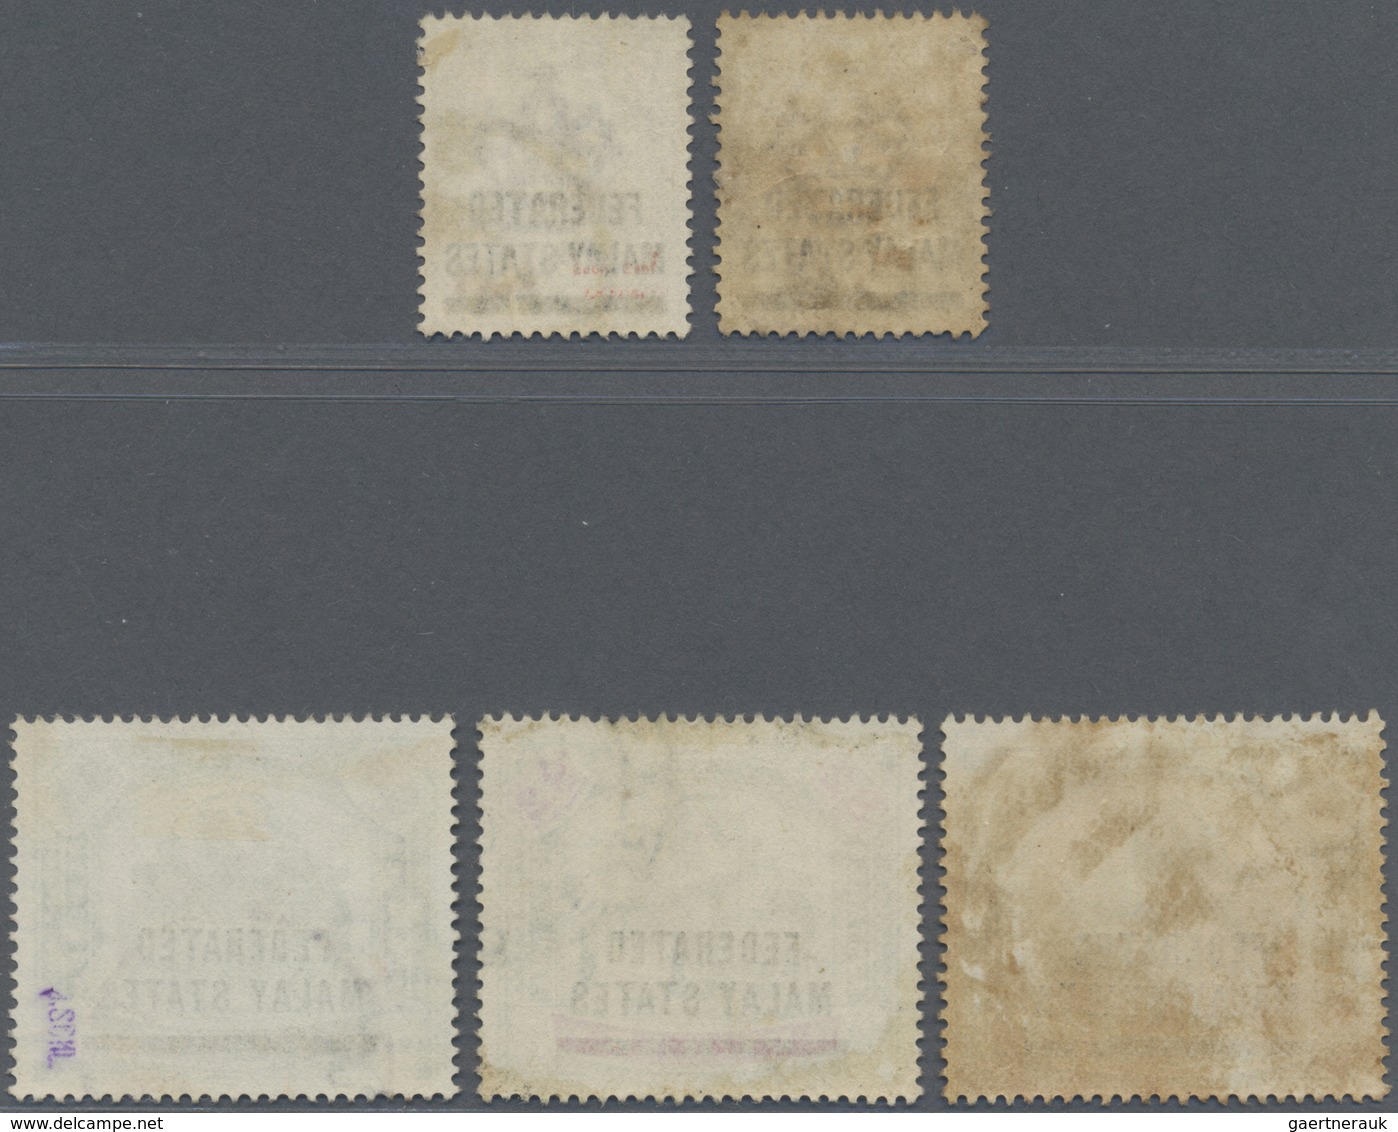 O Malaiischer Staatenbund: 1900, Tiger Head And Elephant Definitives Of Perak Optd. 'FEDERATED MALAY S - Federated Malay States